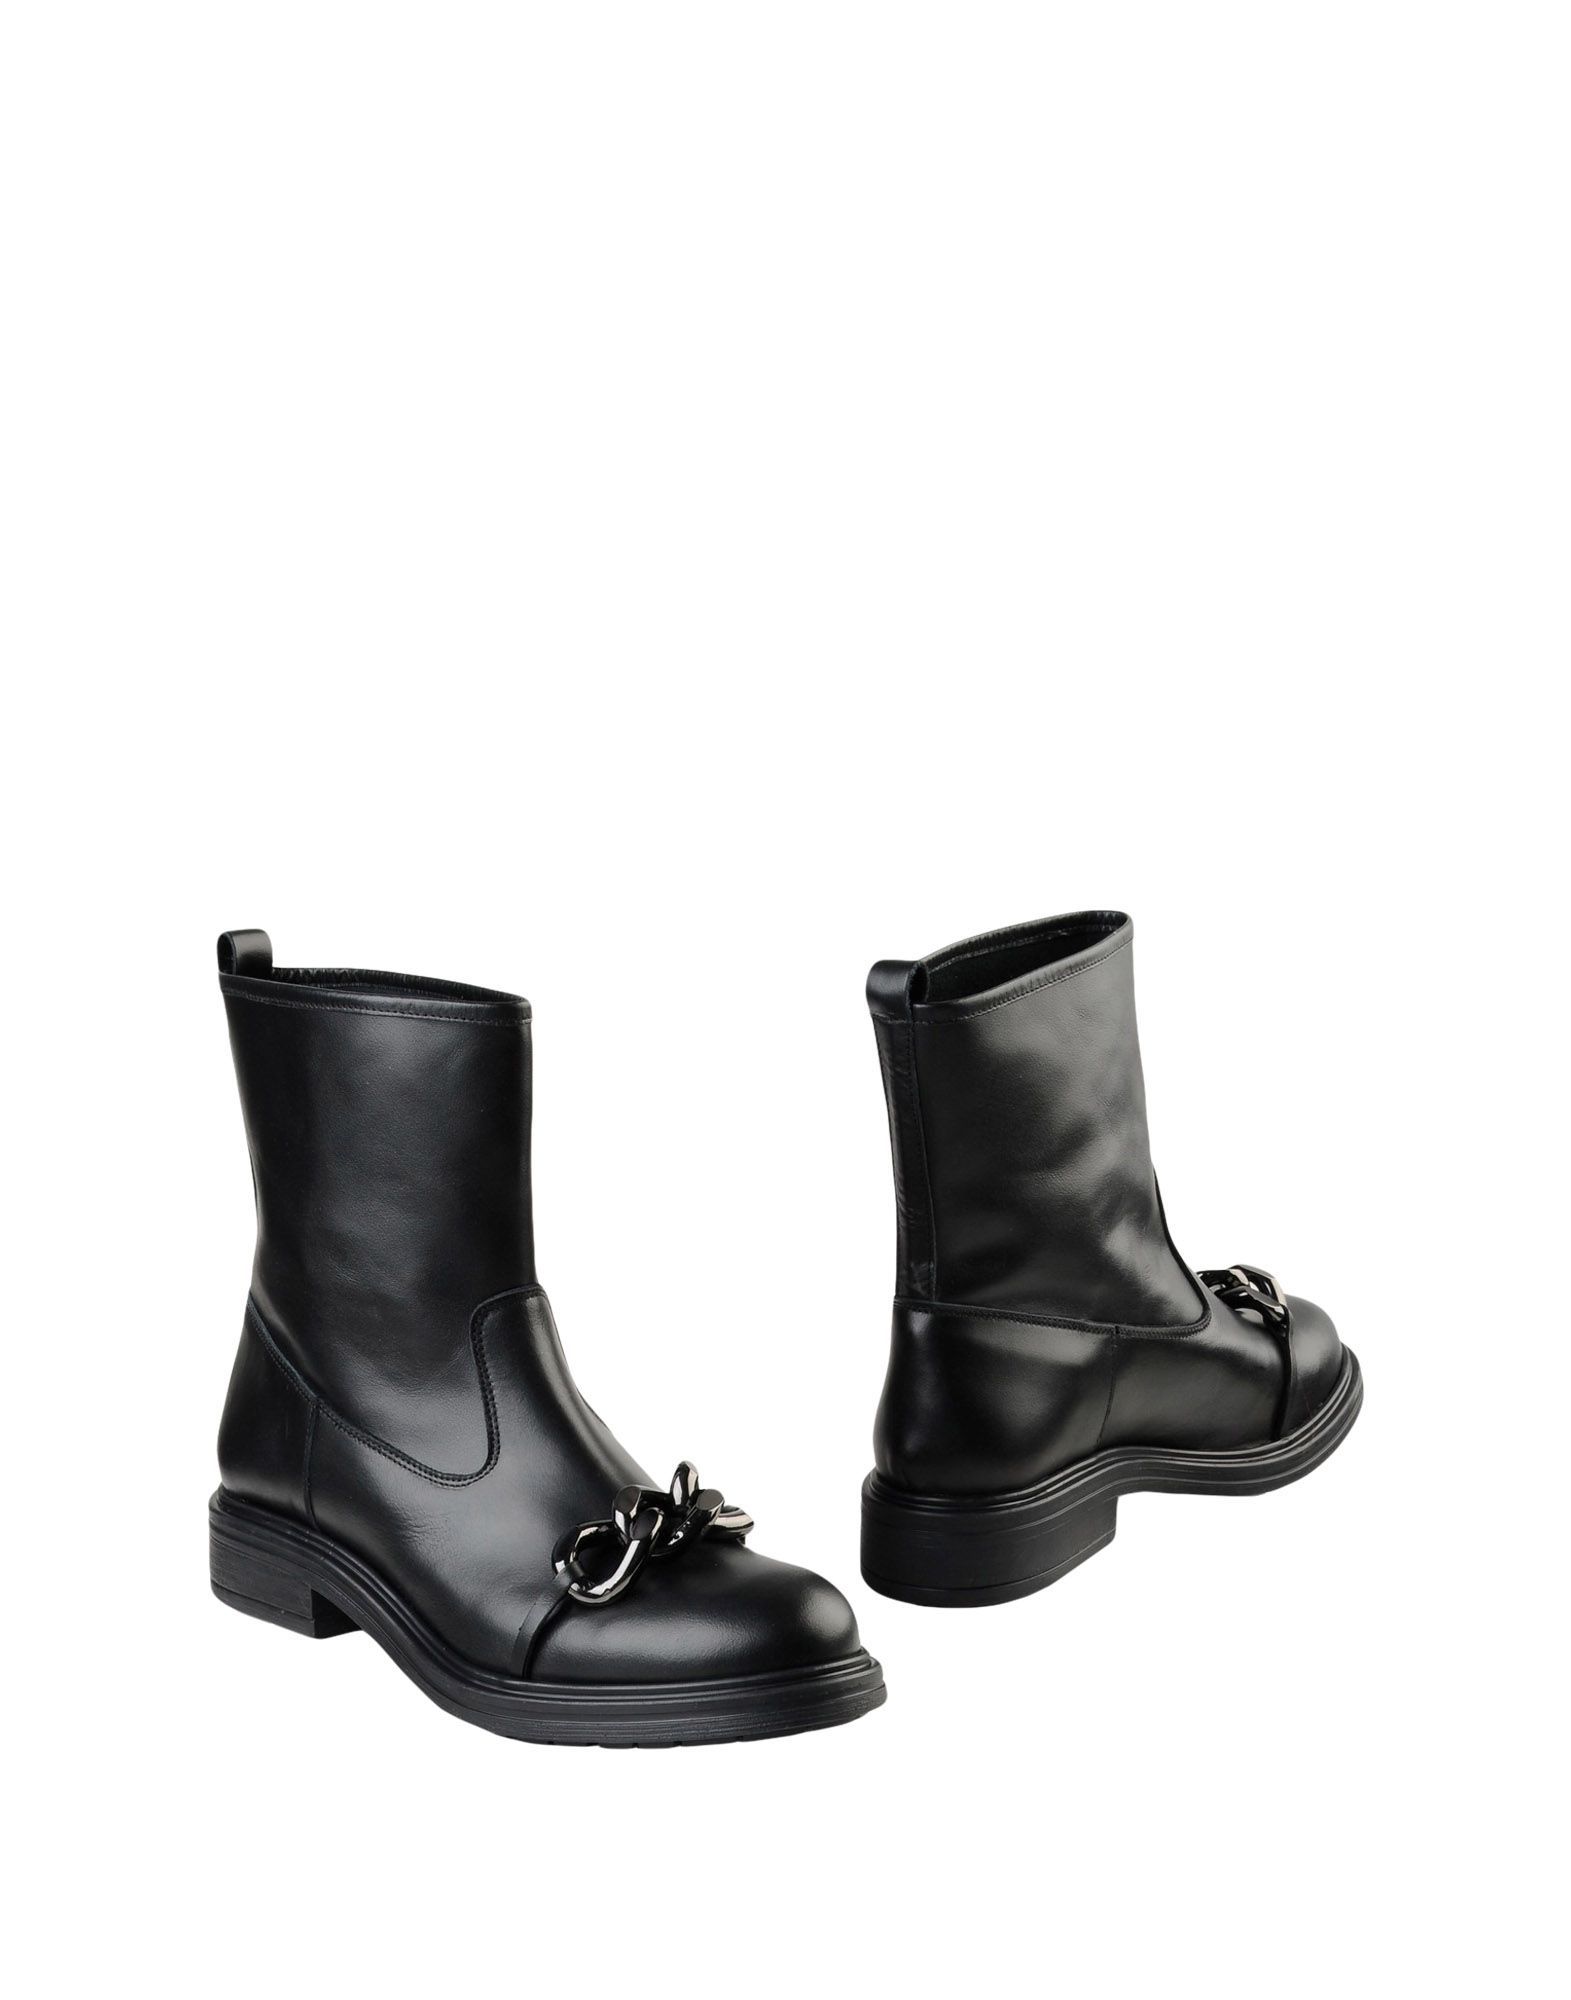 PIERRE DARRÉ Ankle boots | YOOX (US)